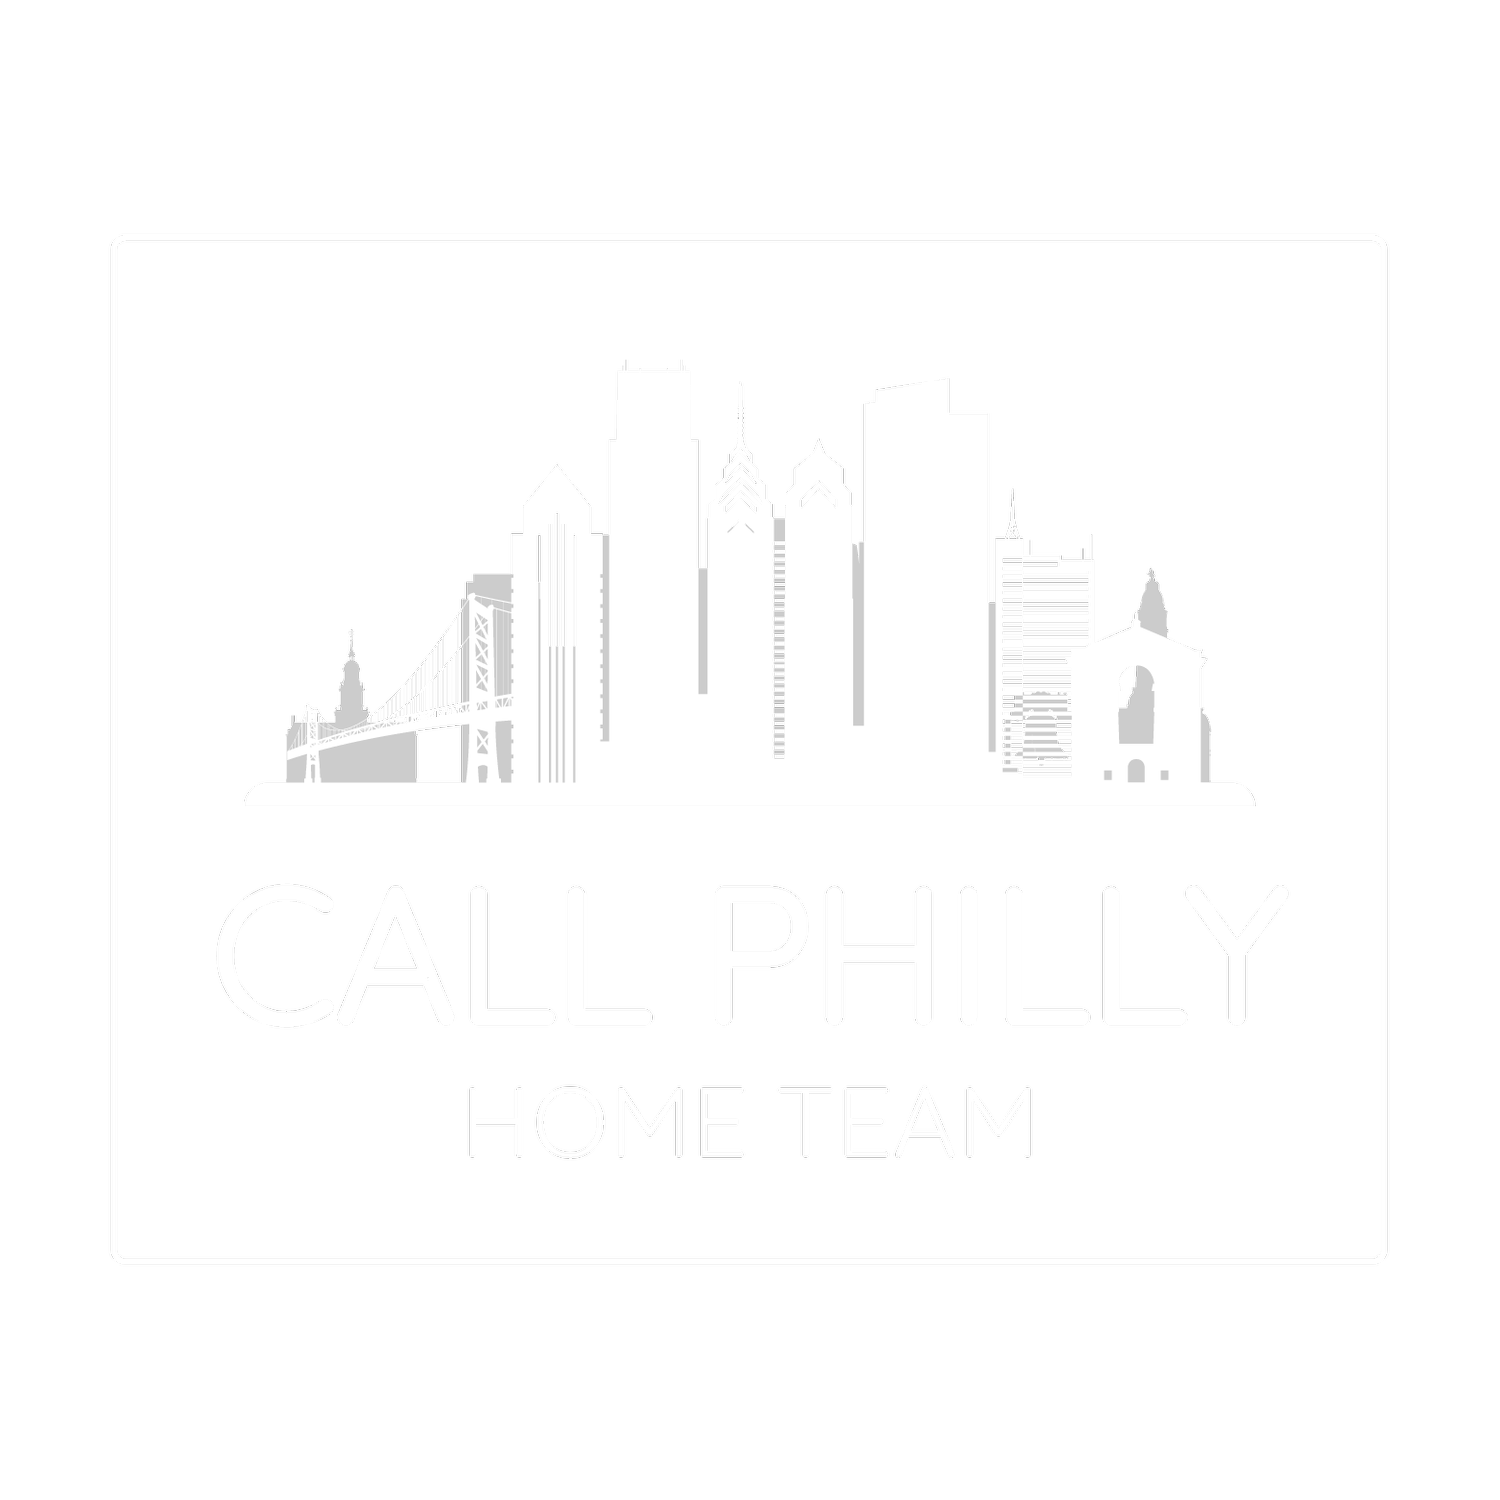 Call Philly Home